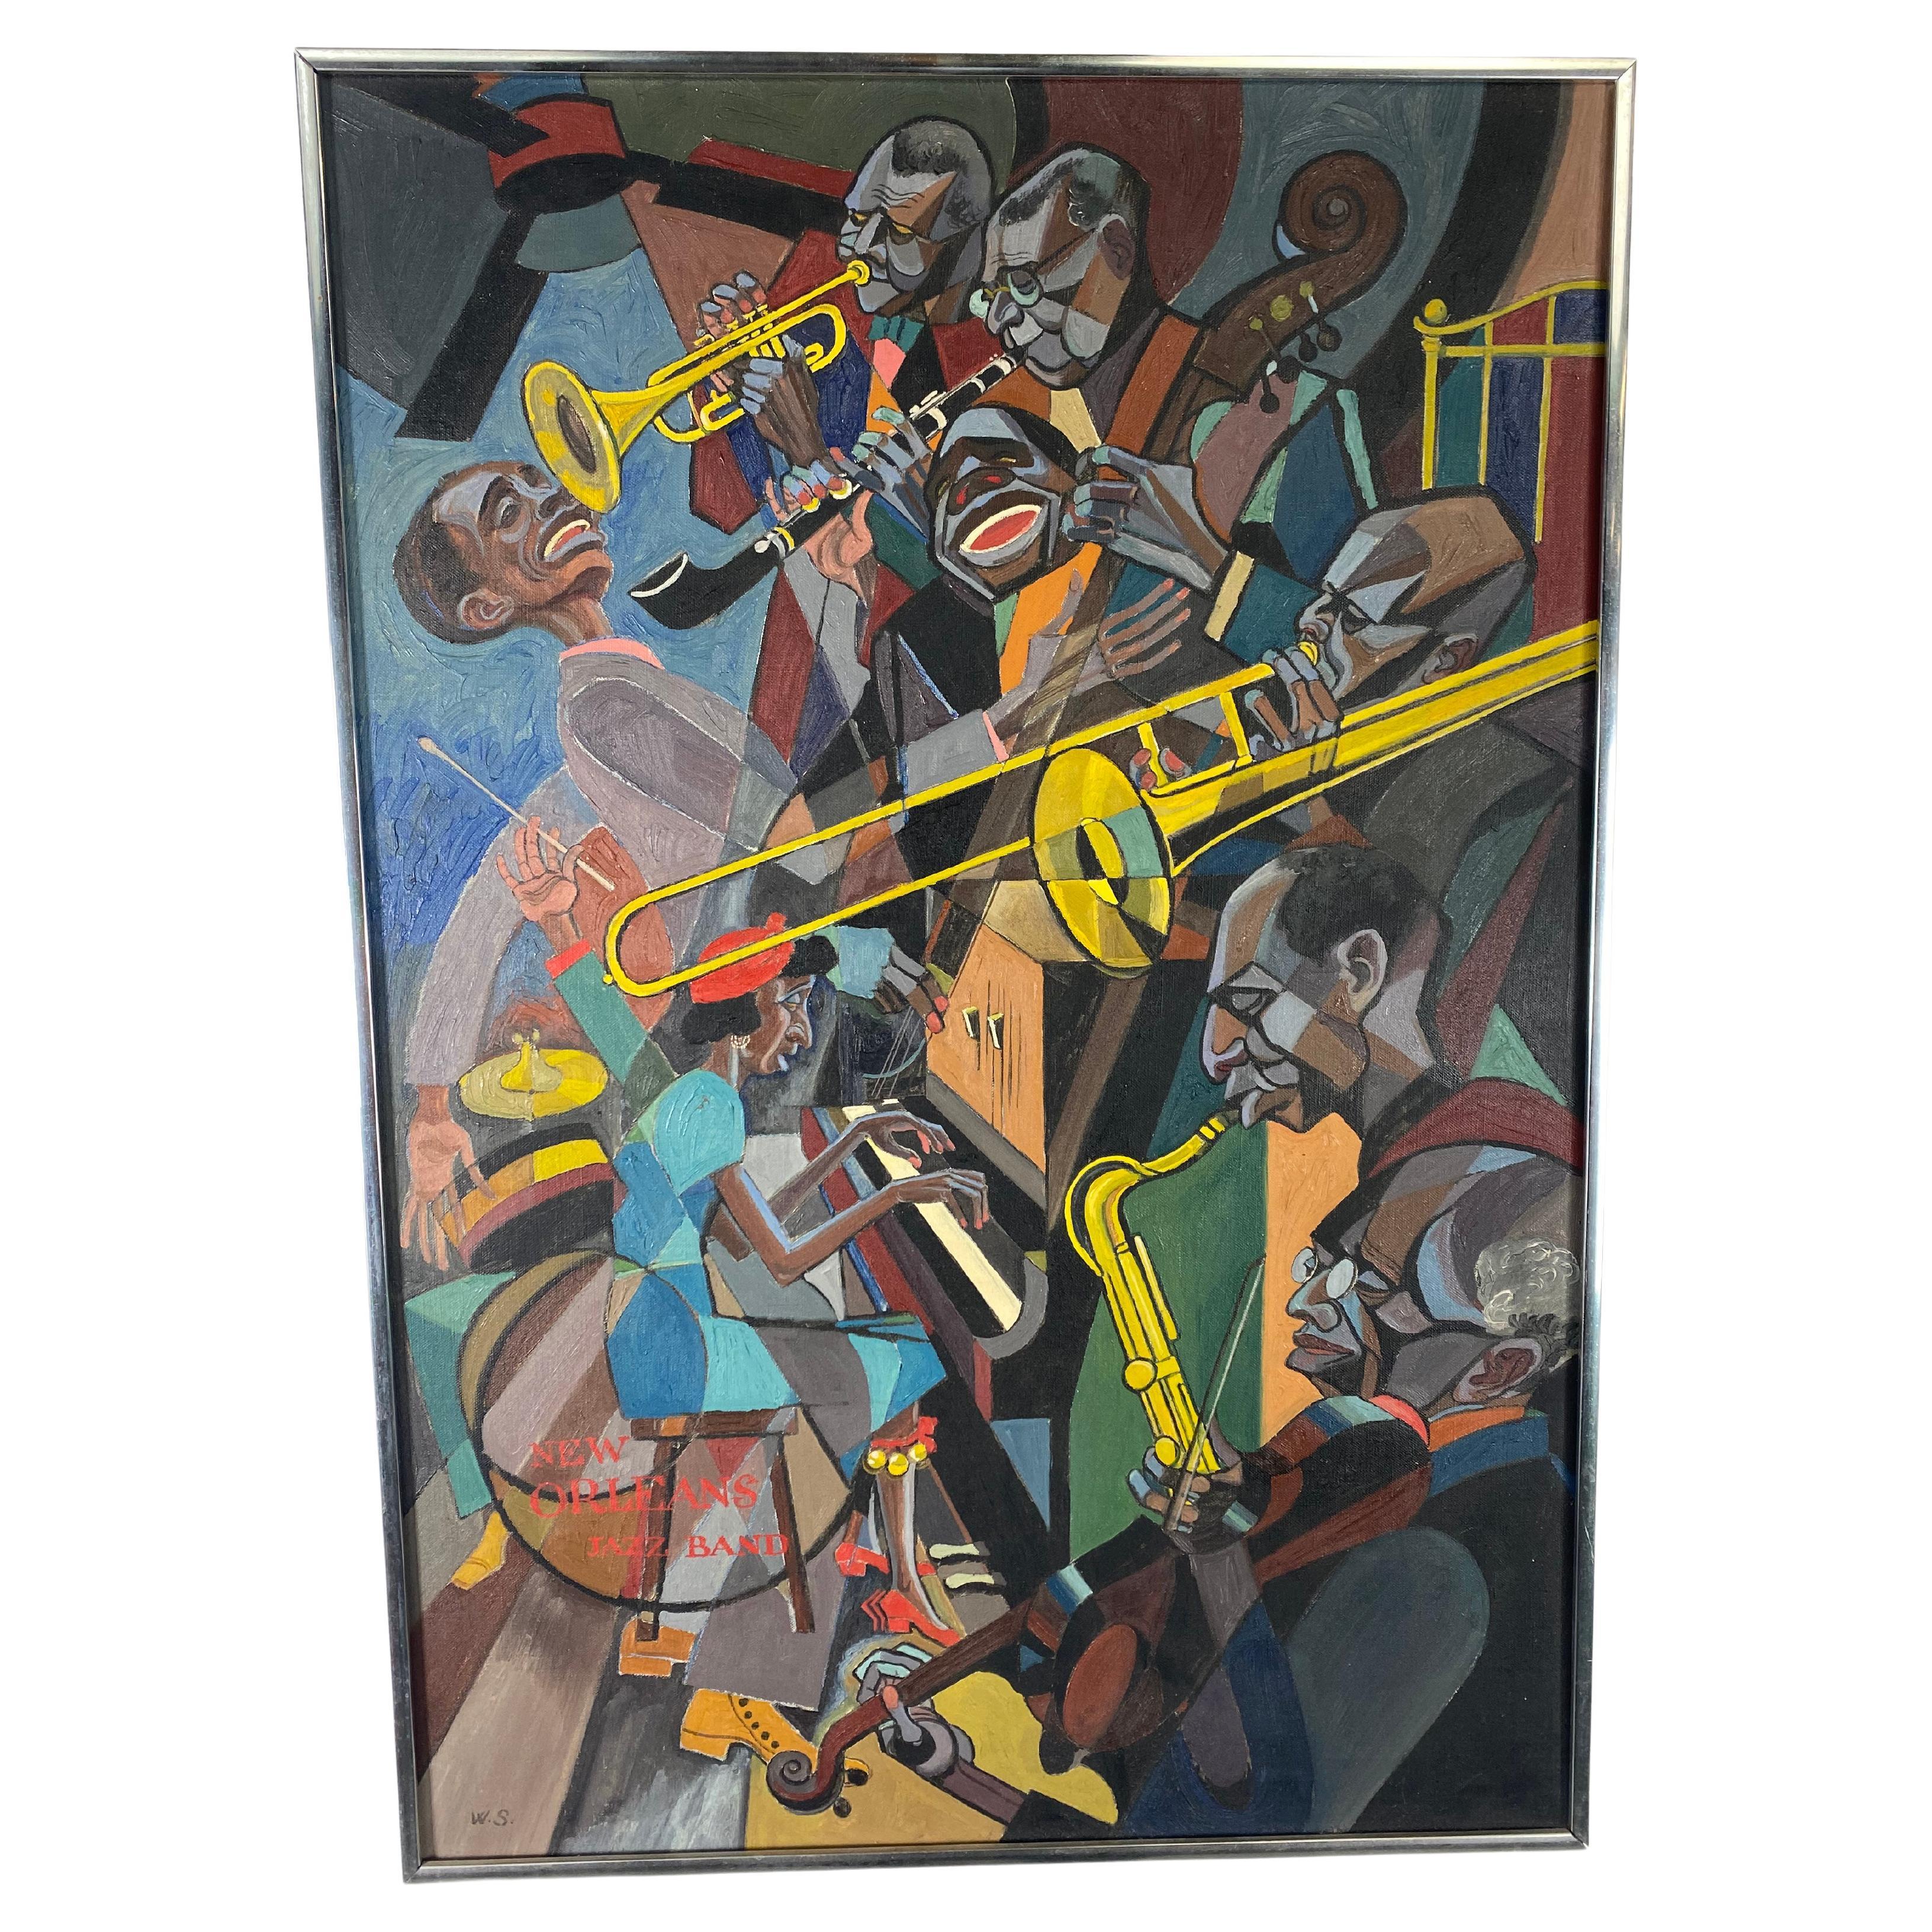 Large Abstract Modernist Cubist Jazz Painting, Oil on Canvas by William Sharp